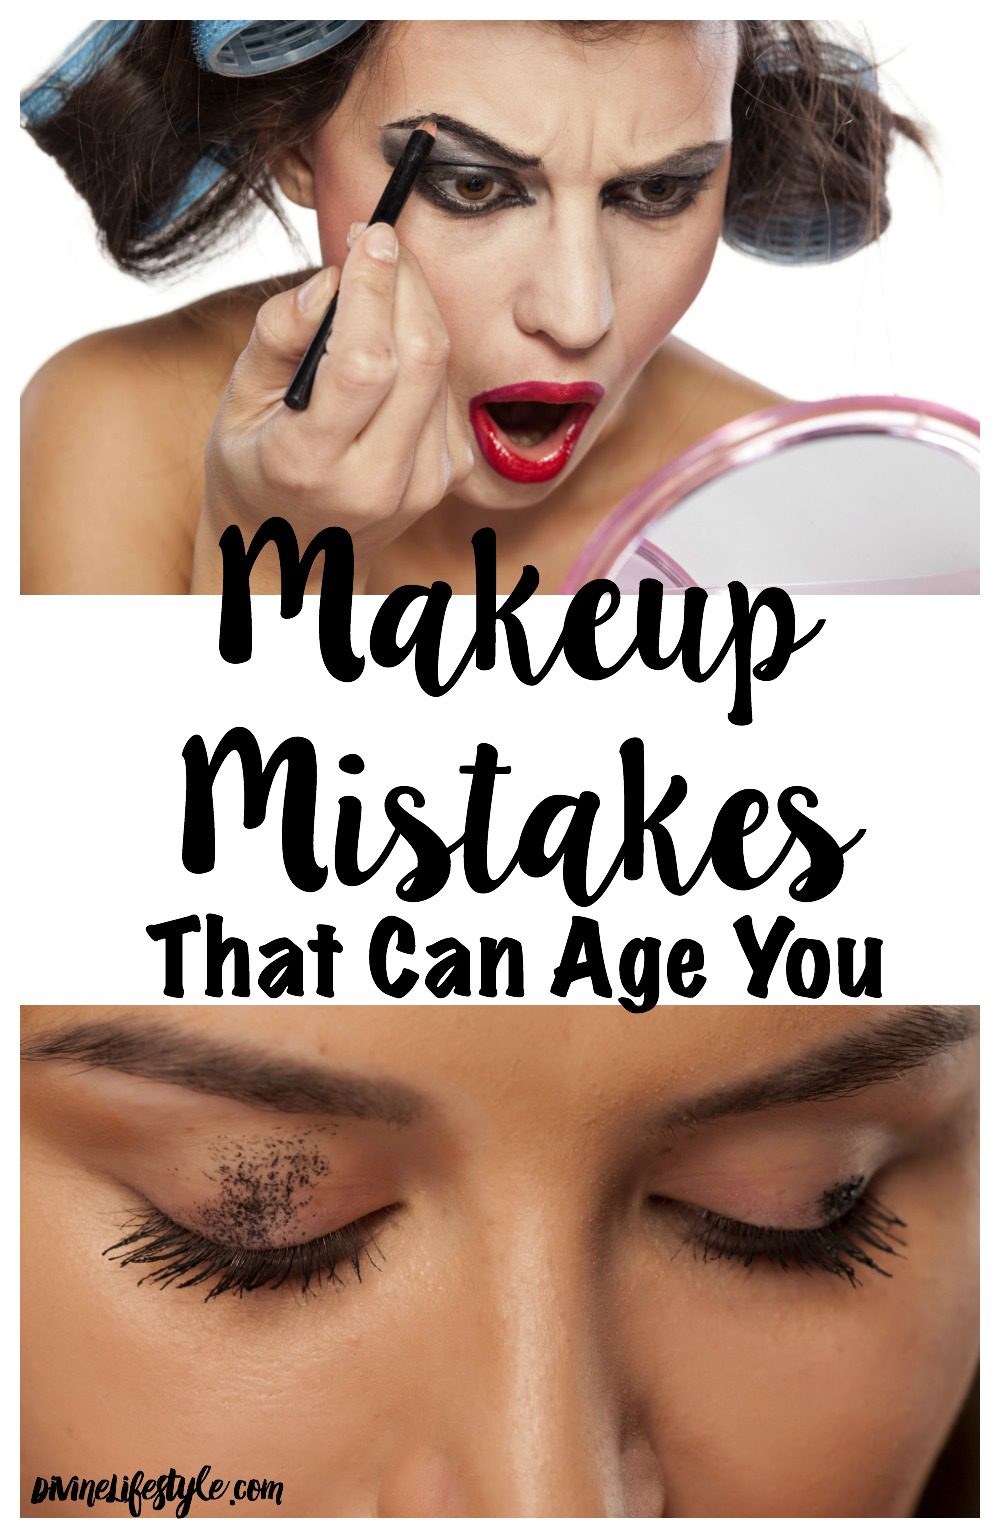 Makeup Mistakes that can age you